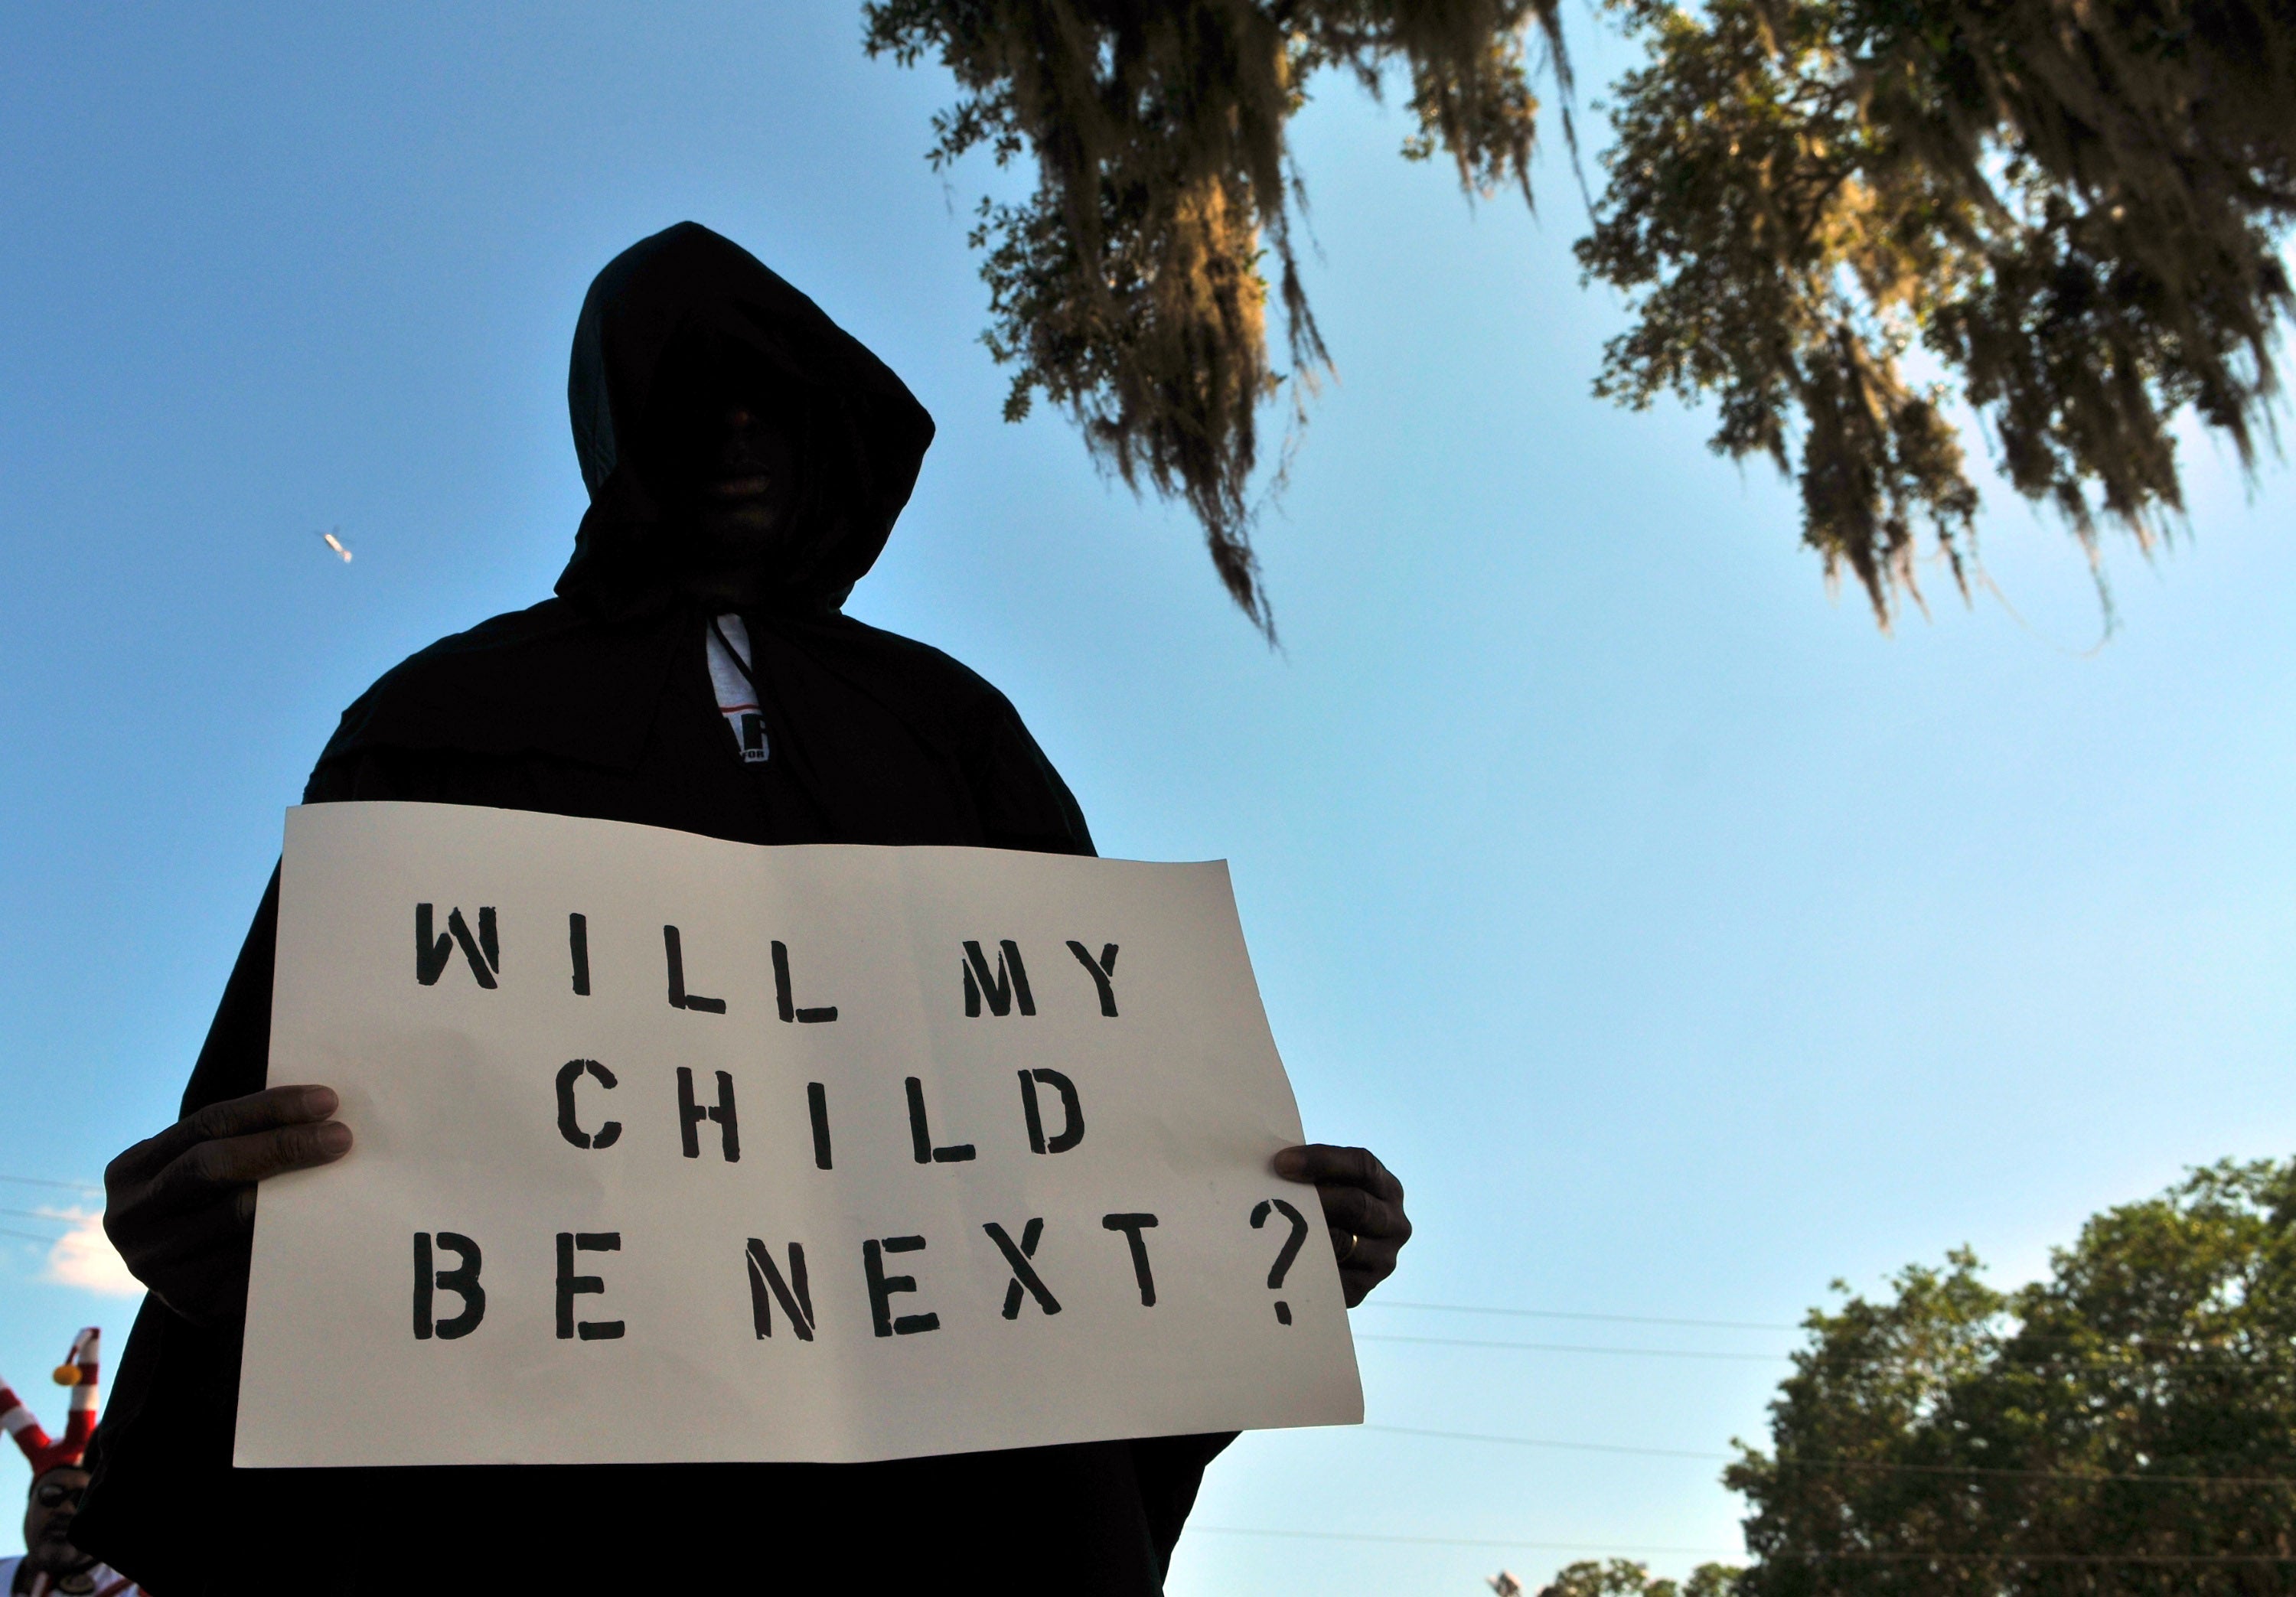 A man dressed in a hood holds up a sign saying "Will My Child Be Next?", during a protest march in Sanford, Florida following the 2012 killing of Trayvon Martin